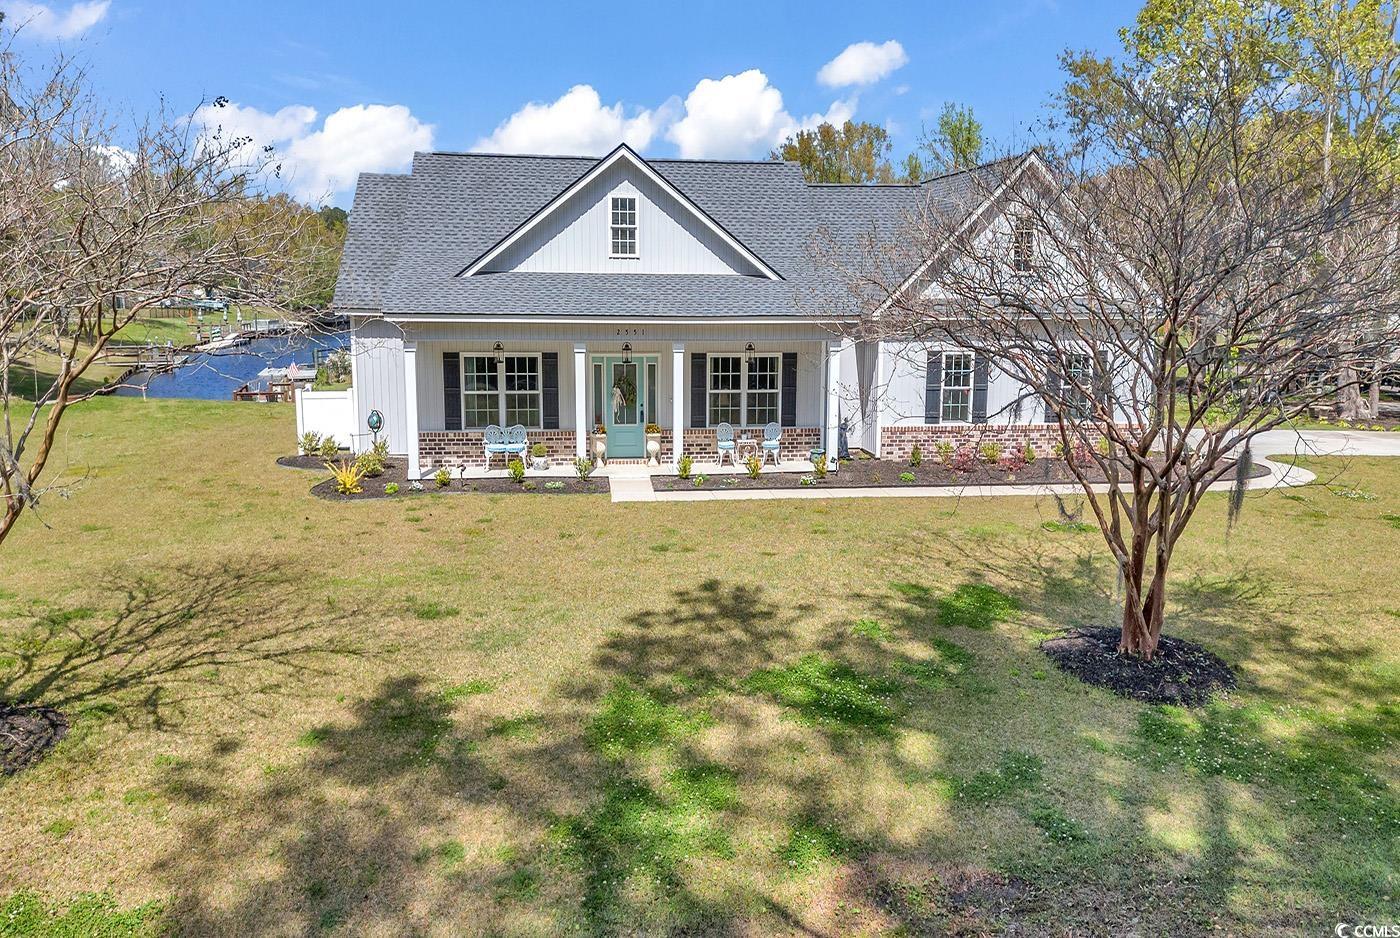 ** brokers open house **  may 10th, 11am-1pm  step into a world of luxury and sophistication with this exquisite 3 bedroom, 2 bathroom home on the dockable canal located in wedgefield plantation in the charming town of georgetown. as you enter through the beautiful entryway, you are greeted by custom details and high-end finishes at every turn.  the custom laundry room is a true gem, making laundry day a breeze with its thoughtful design and functionality. the master bathroom is a sanctuary of relaxation with its beautiful tile work and elegant fixtures, creating a spa-like atmosphere in the comfort of your own home.  in the kitchen, you will find a stunning copper sink and top-of-the-line finishes that will inspire your inner chef. the back porch offers a peaceful retreat with views of the serene dockable canal, perfect for enjoying your morning coffee or hosting a summer barbecue.  outside, the meticulously groomed yard showcases the pride of ownership and attention to detail that defines this property. with a propane gas stove and electric hookups, you have the best of both worlds for cooking options, and propane is available on site for a future fireplace hookup, adding to the cozy ambiance of the home.  inside, high-end ltv floors flow seamlessly throughout the living spaces, while the bedrooms are adorned with plush carpeting for added comfort. this property also boasts access to a golf course, where golf carts are allowed and an onsite pub to wind down after a long day.  located close to downtown georgetown, you are just a stone's throw away from charming shops, delectable restaurants, picturesque parks, and vibrant nightlife, ensuring that you are always at the heart of the action. don't miss your chance to experience the epitome of luxury living in this spectacular property.